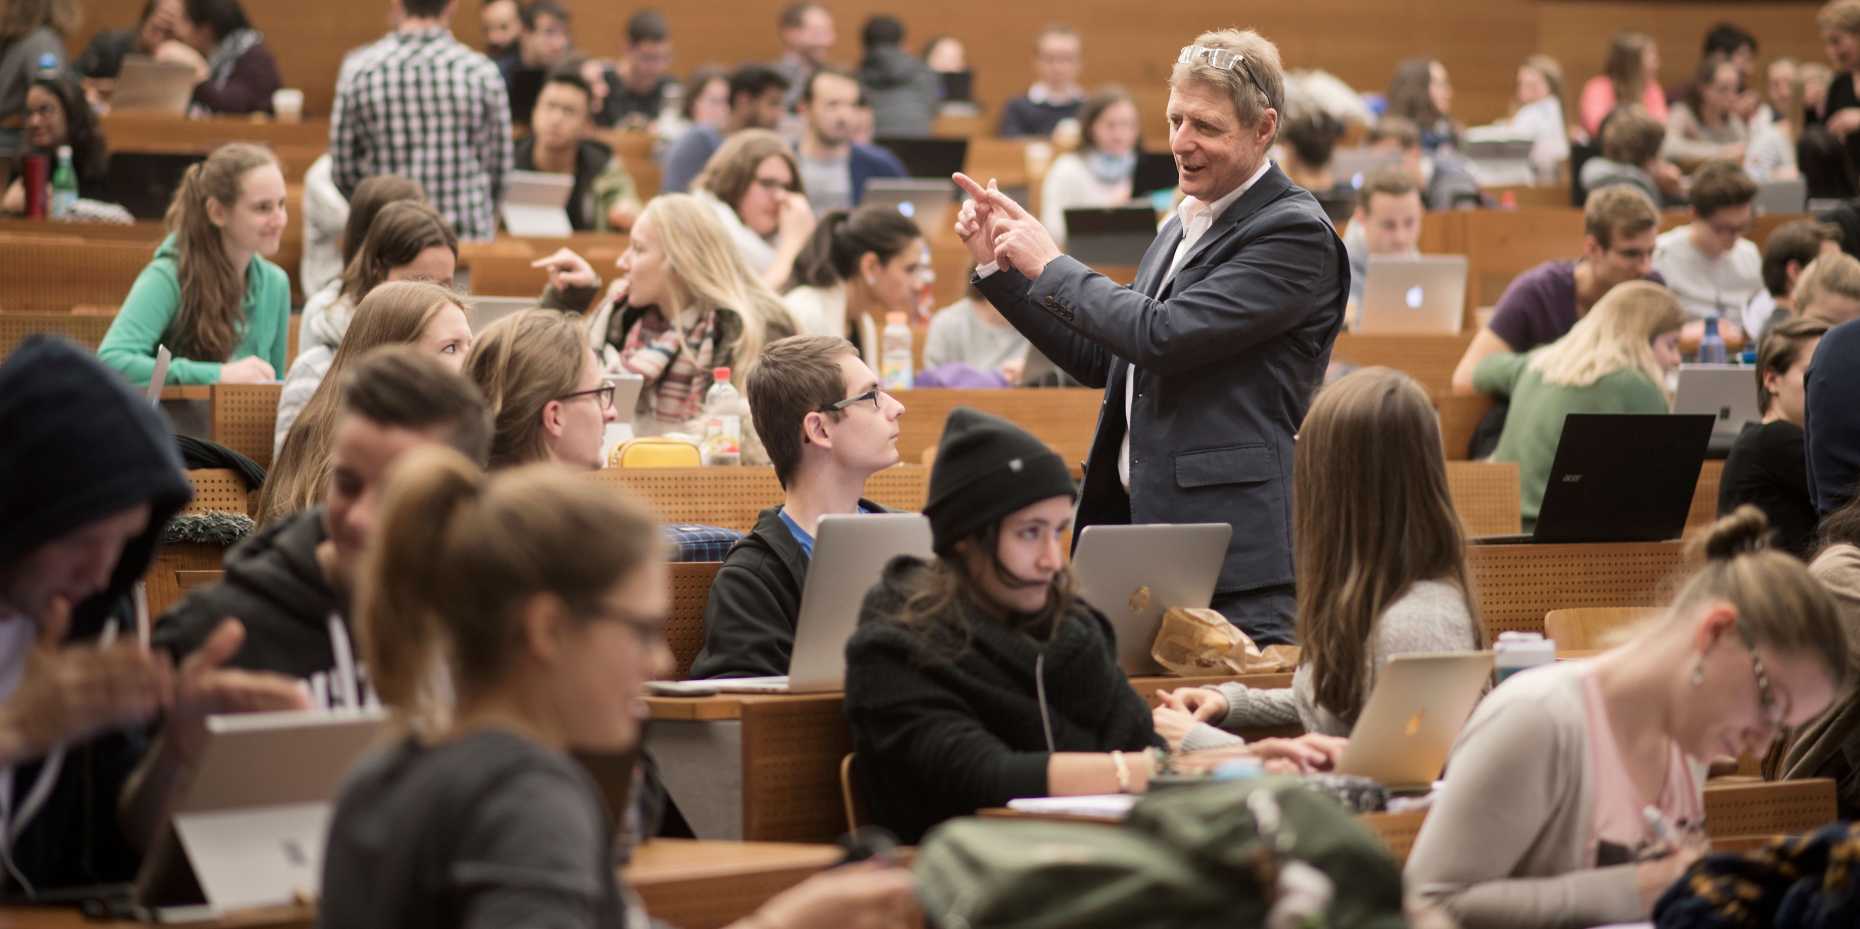 ETH Professor Ernst Hafen with his students (Photograph: Simon Tanner)